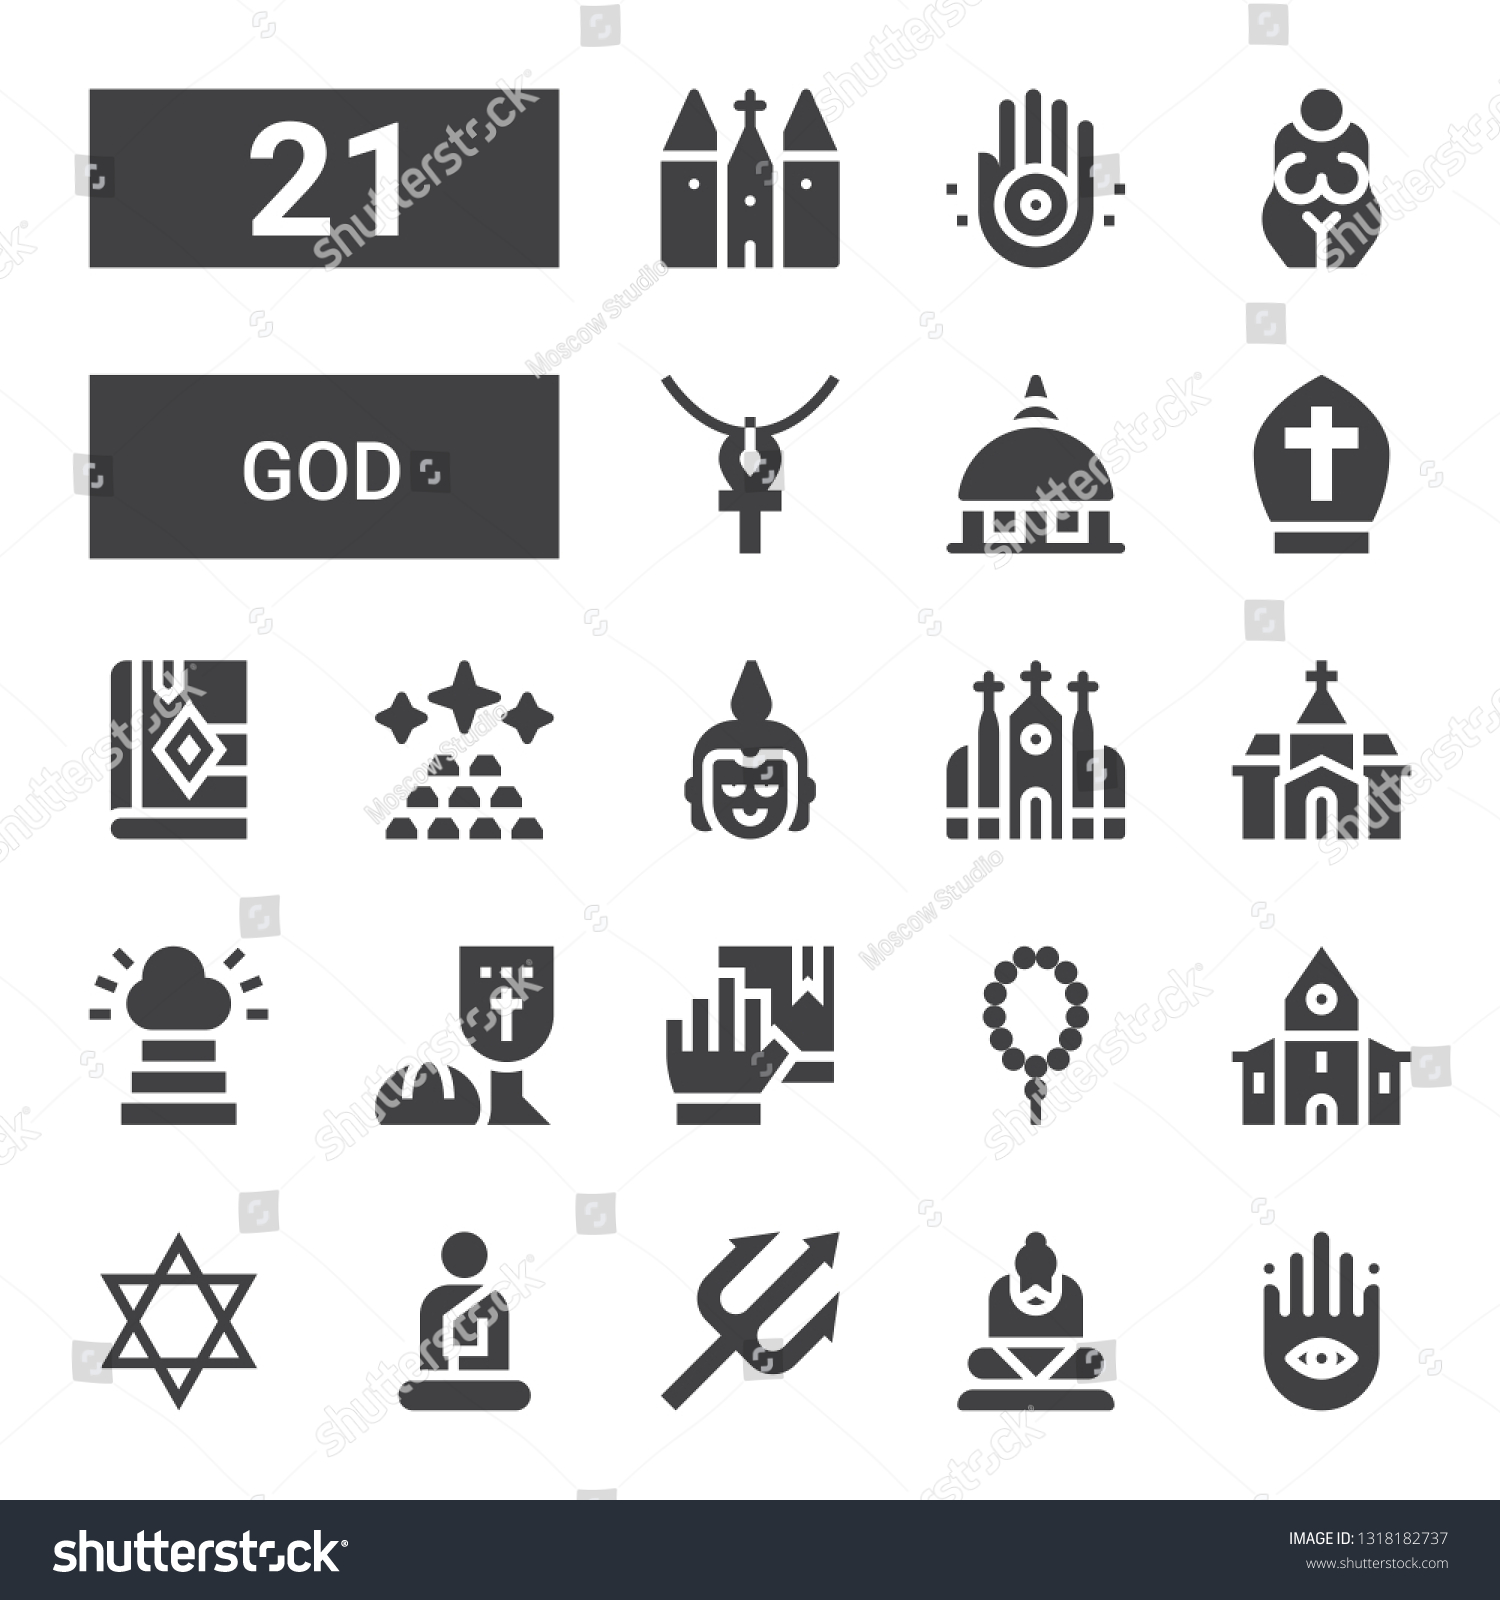 SVG of god icon set. Collection of 21 filled god icons included Buddhism, Buddha, Trident, Judaism, Church, Prayer, Oath, Last supper, Heaven, Ingots, Bible, Pope, Vatican, Ankh, Goddess svg